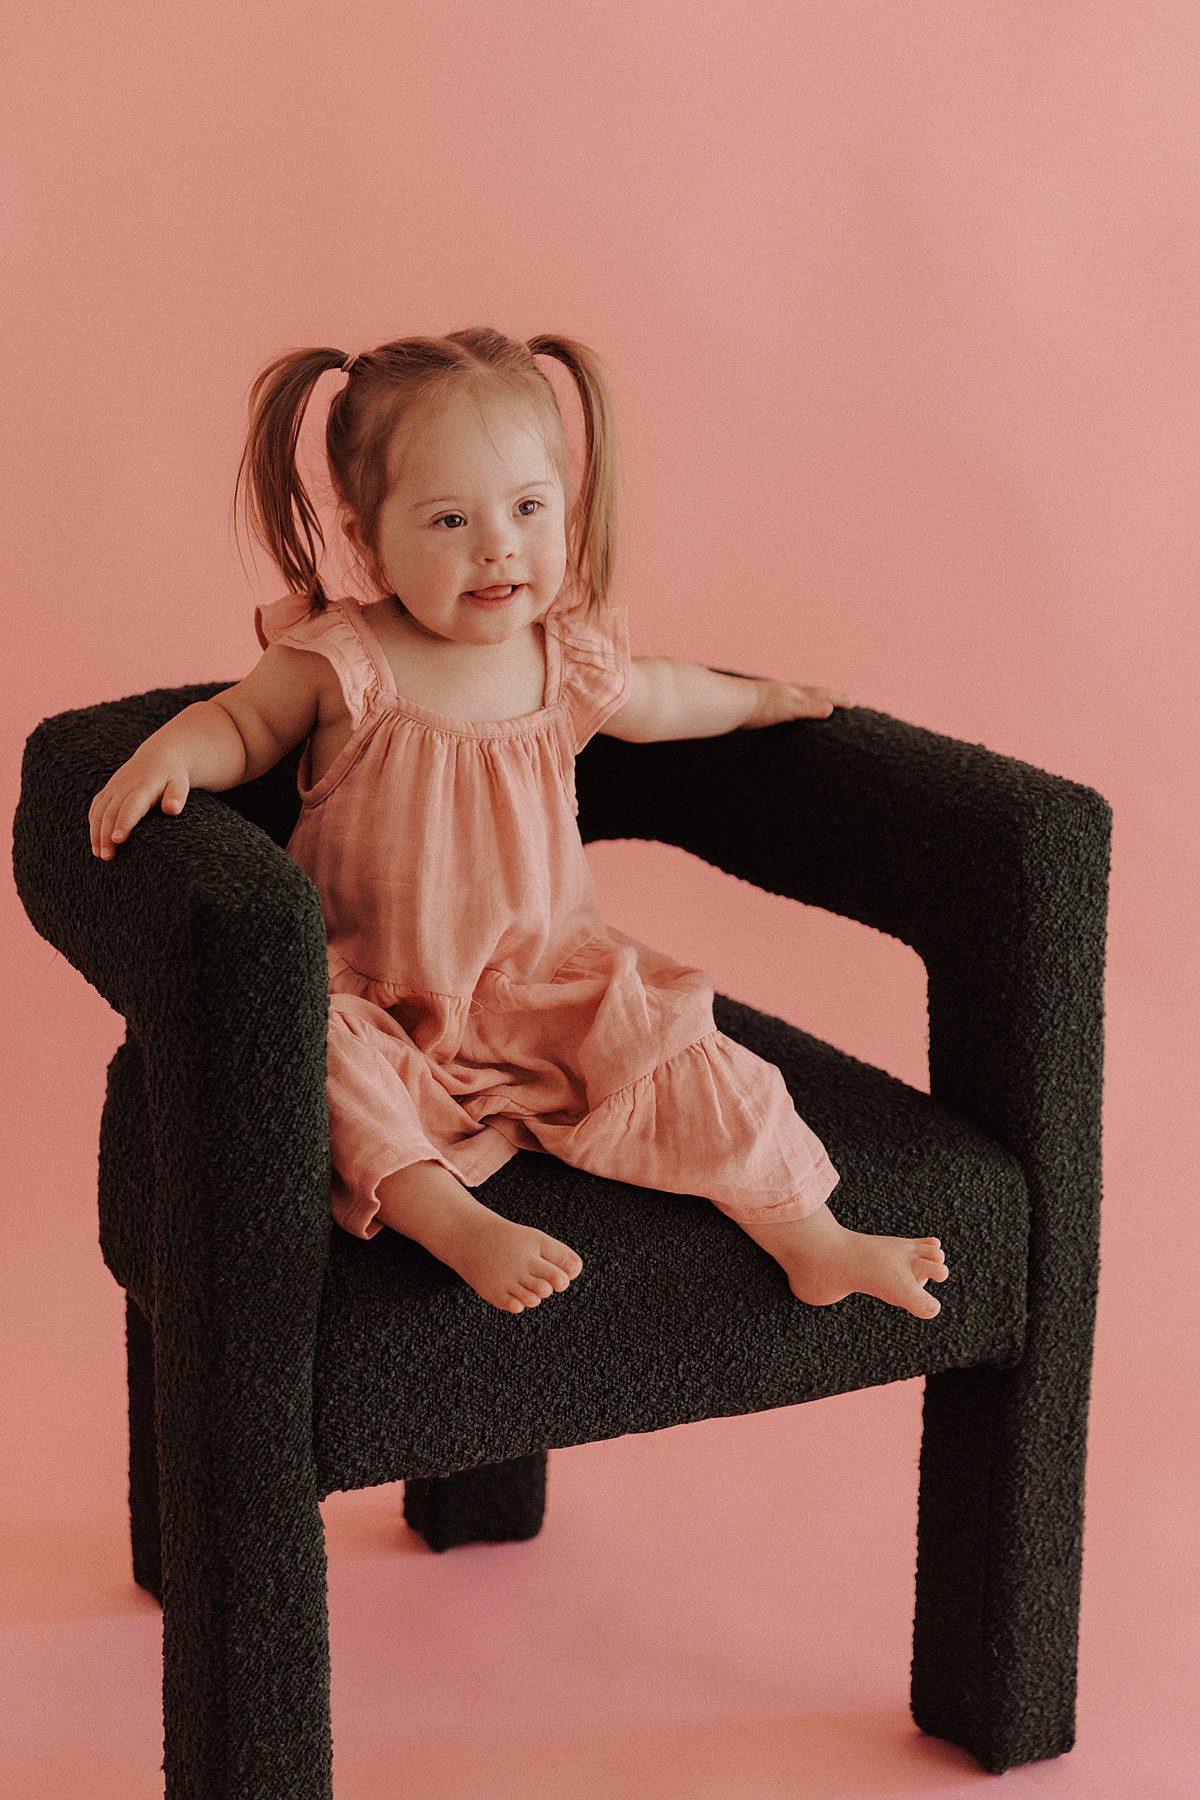 Toddler girl with blonde pigtails sits in a green chair in front of a pink backdrop